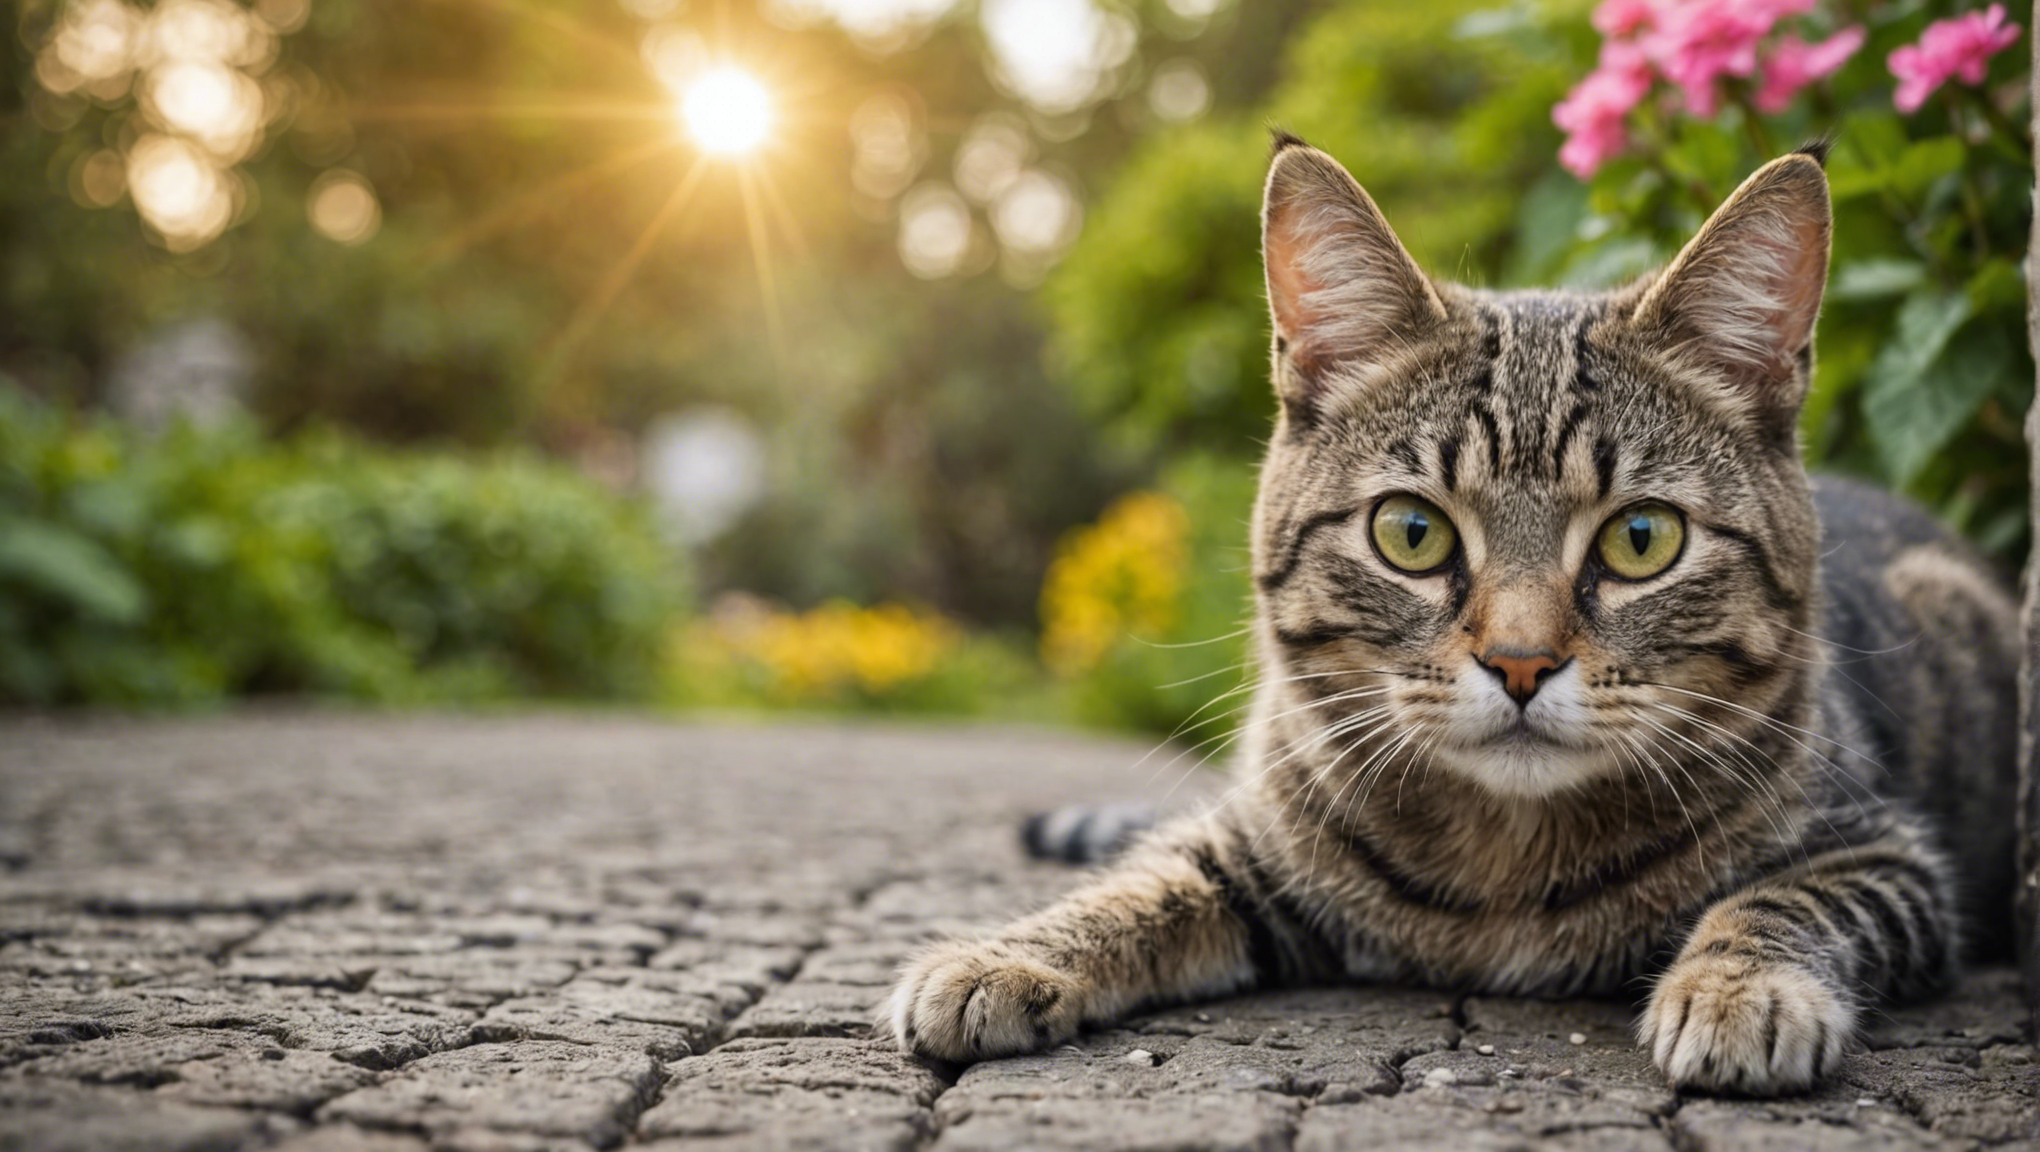 learn how to protect your pets from pests with the ultimate guide to pet-friendly pest control strategies that keep your furry friends safe and secure.